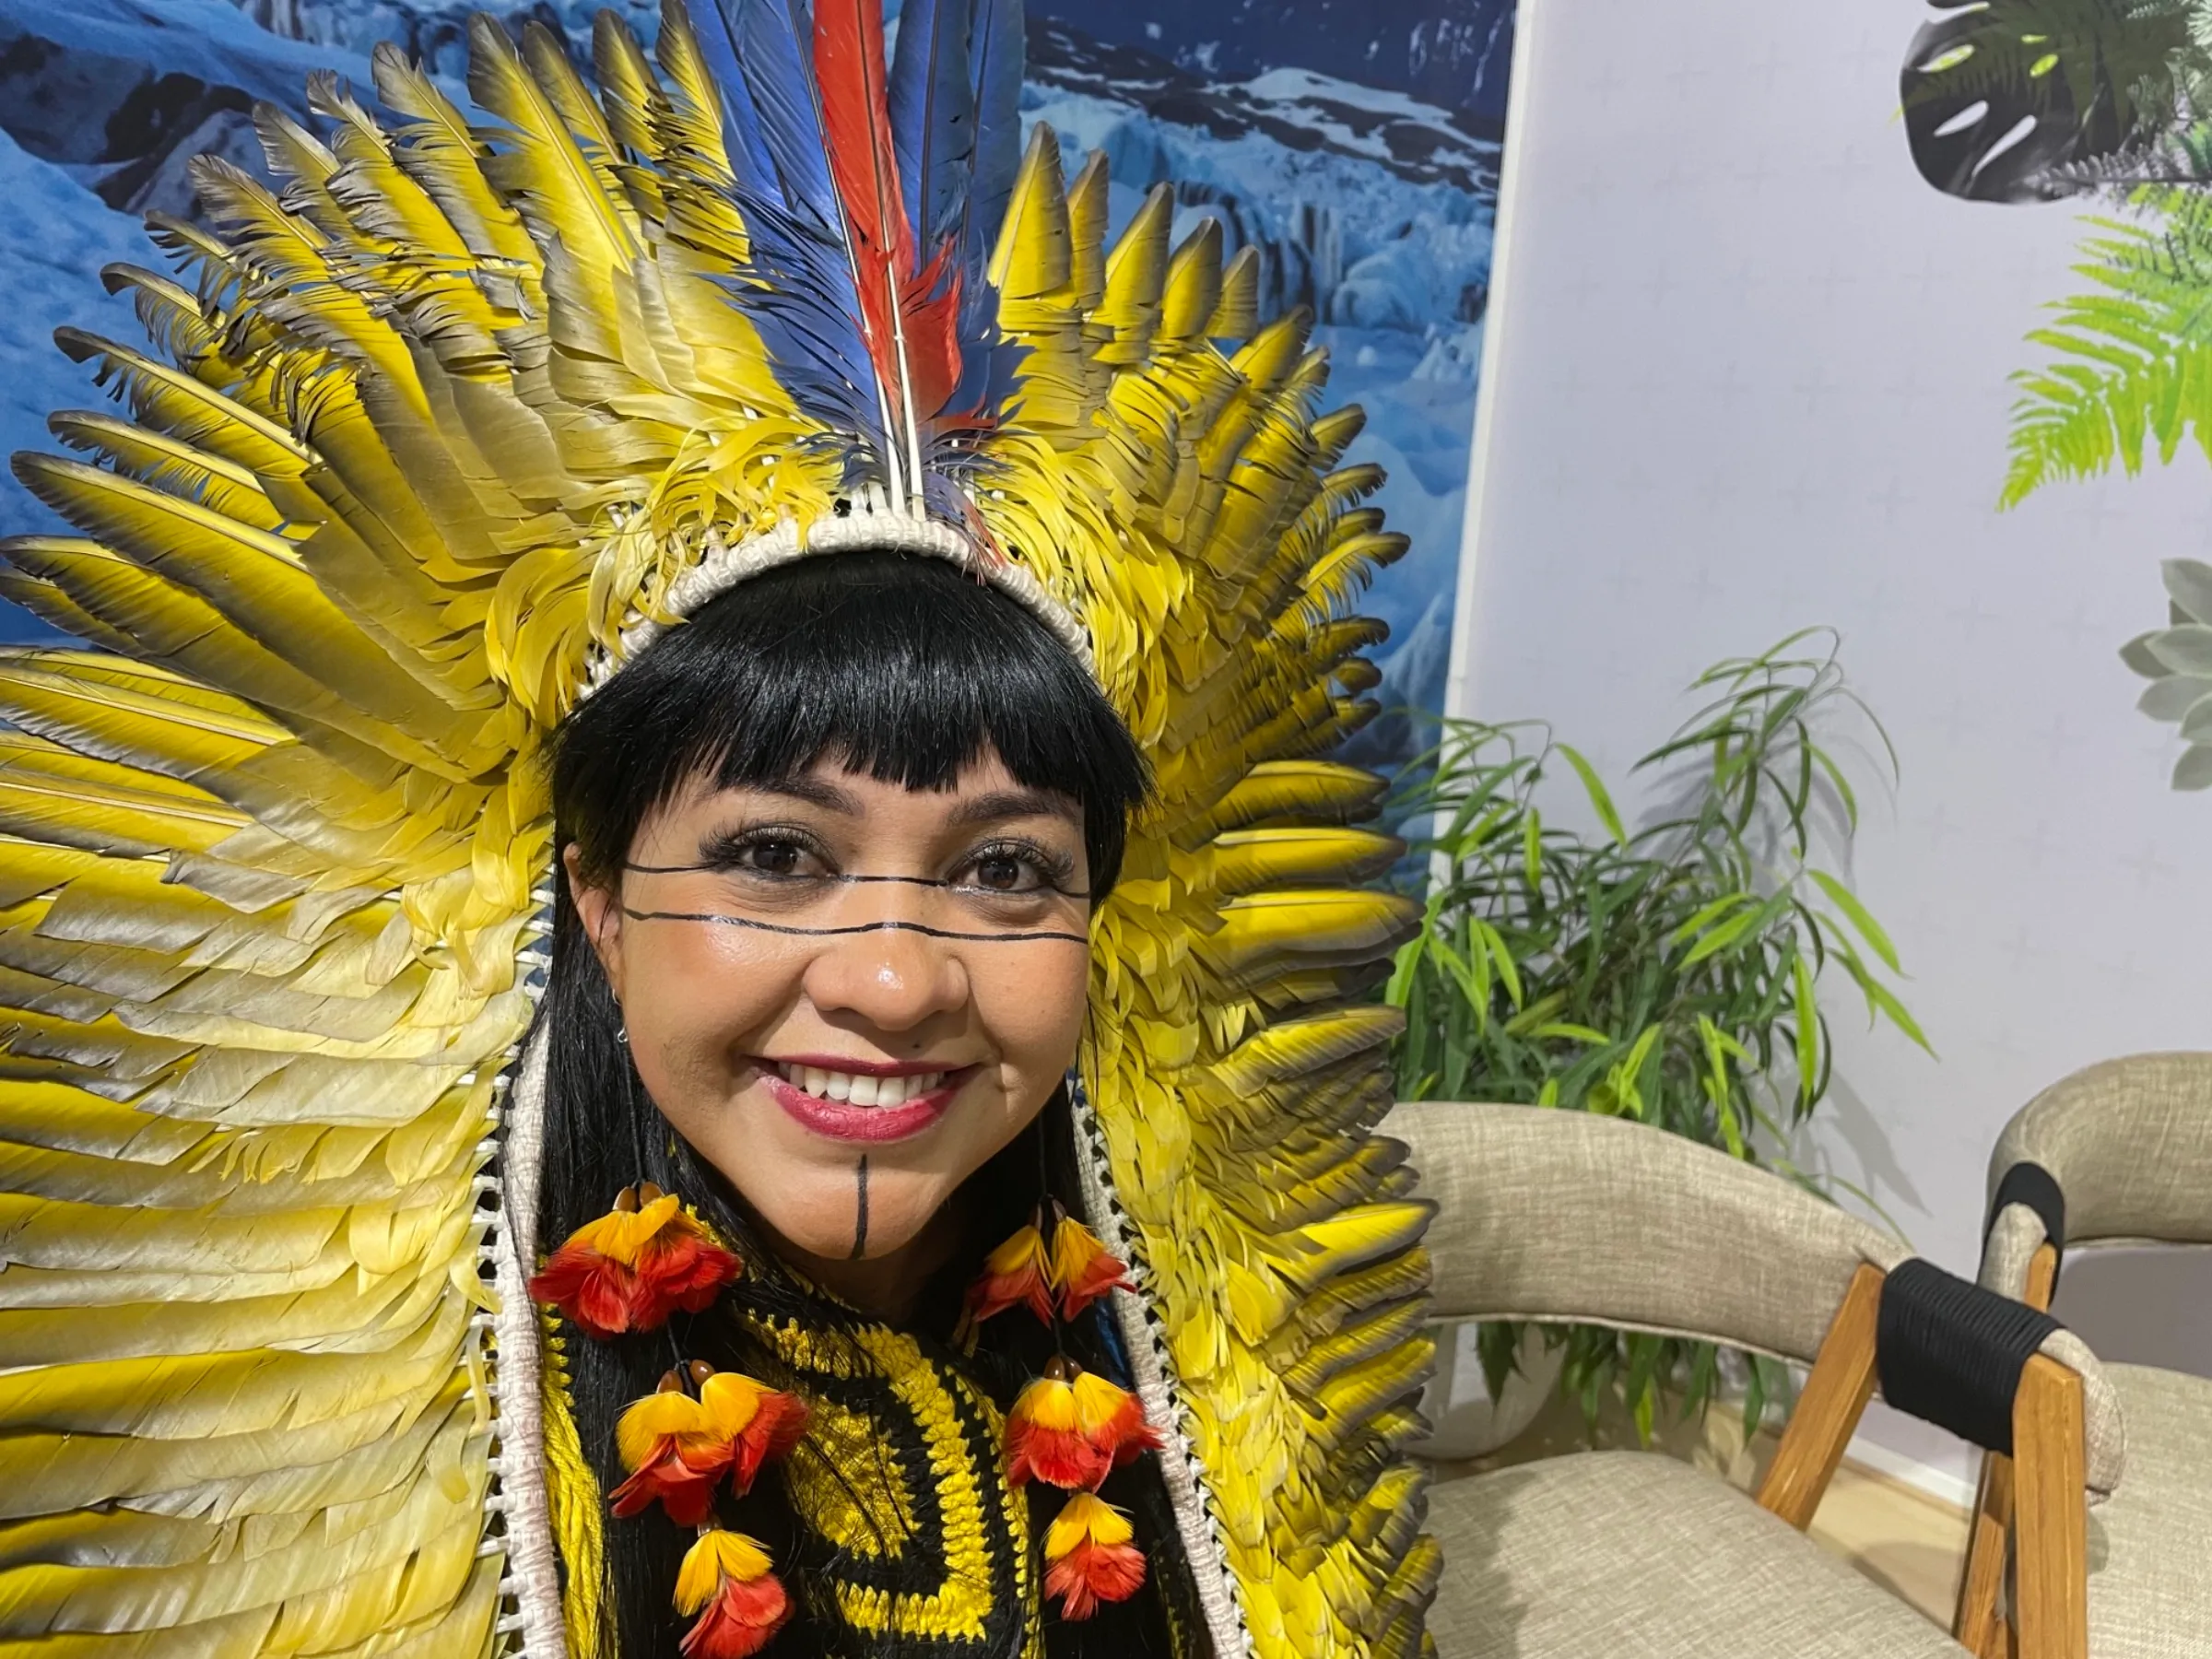 Célia Xakriabá, a newly elected indigenous Brazilian congresswoman, poses for a photo at the COP27 U.N. climate negotiations in Sharm el-Sheikh, Egypt, November 11, 2022. Thomson Reuters Foundation/Laurie Goering